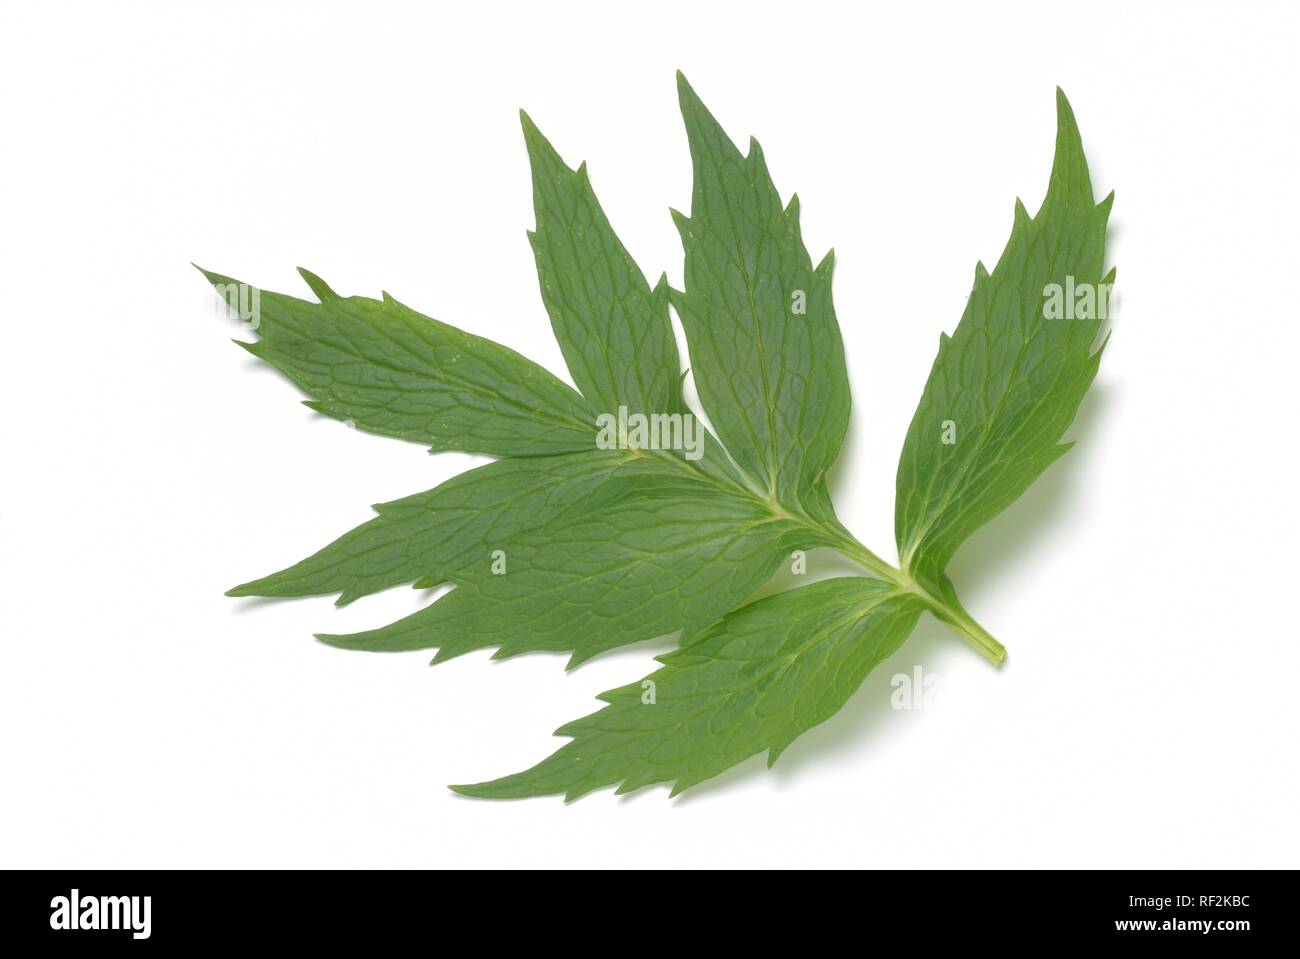 Valerian or All-heal leaves (Valeriana officinalis), medicinal plant, herb Stock Photo